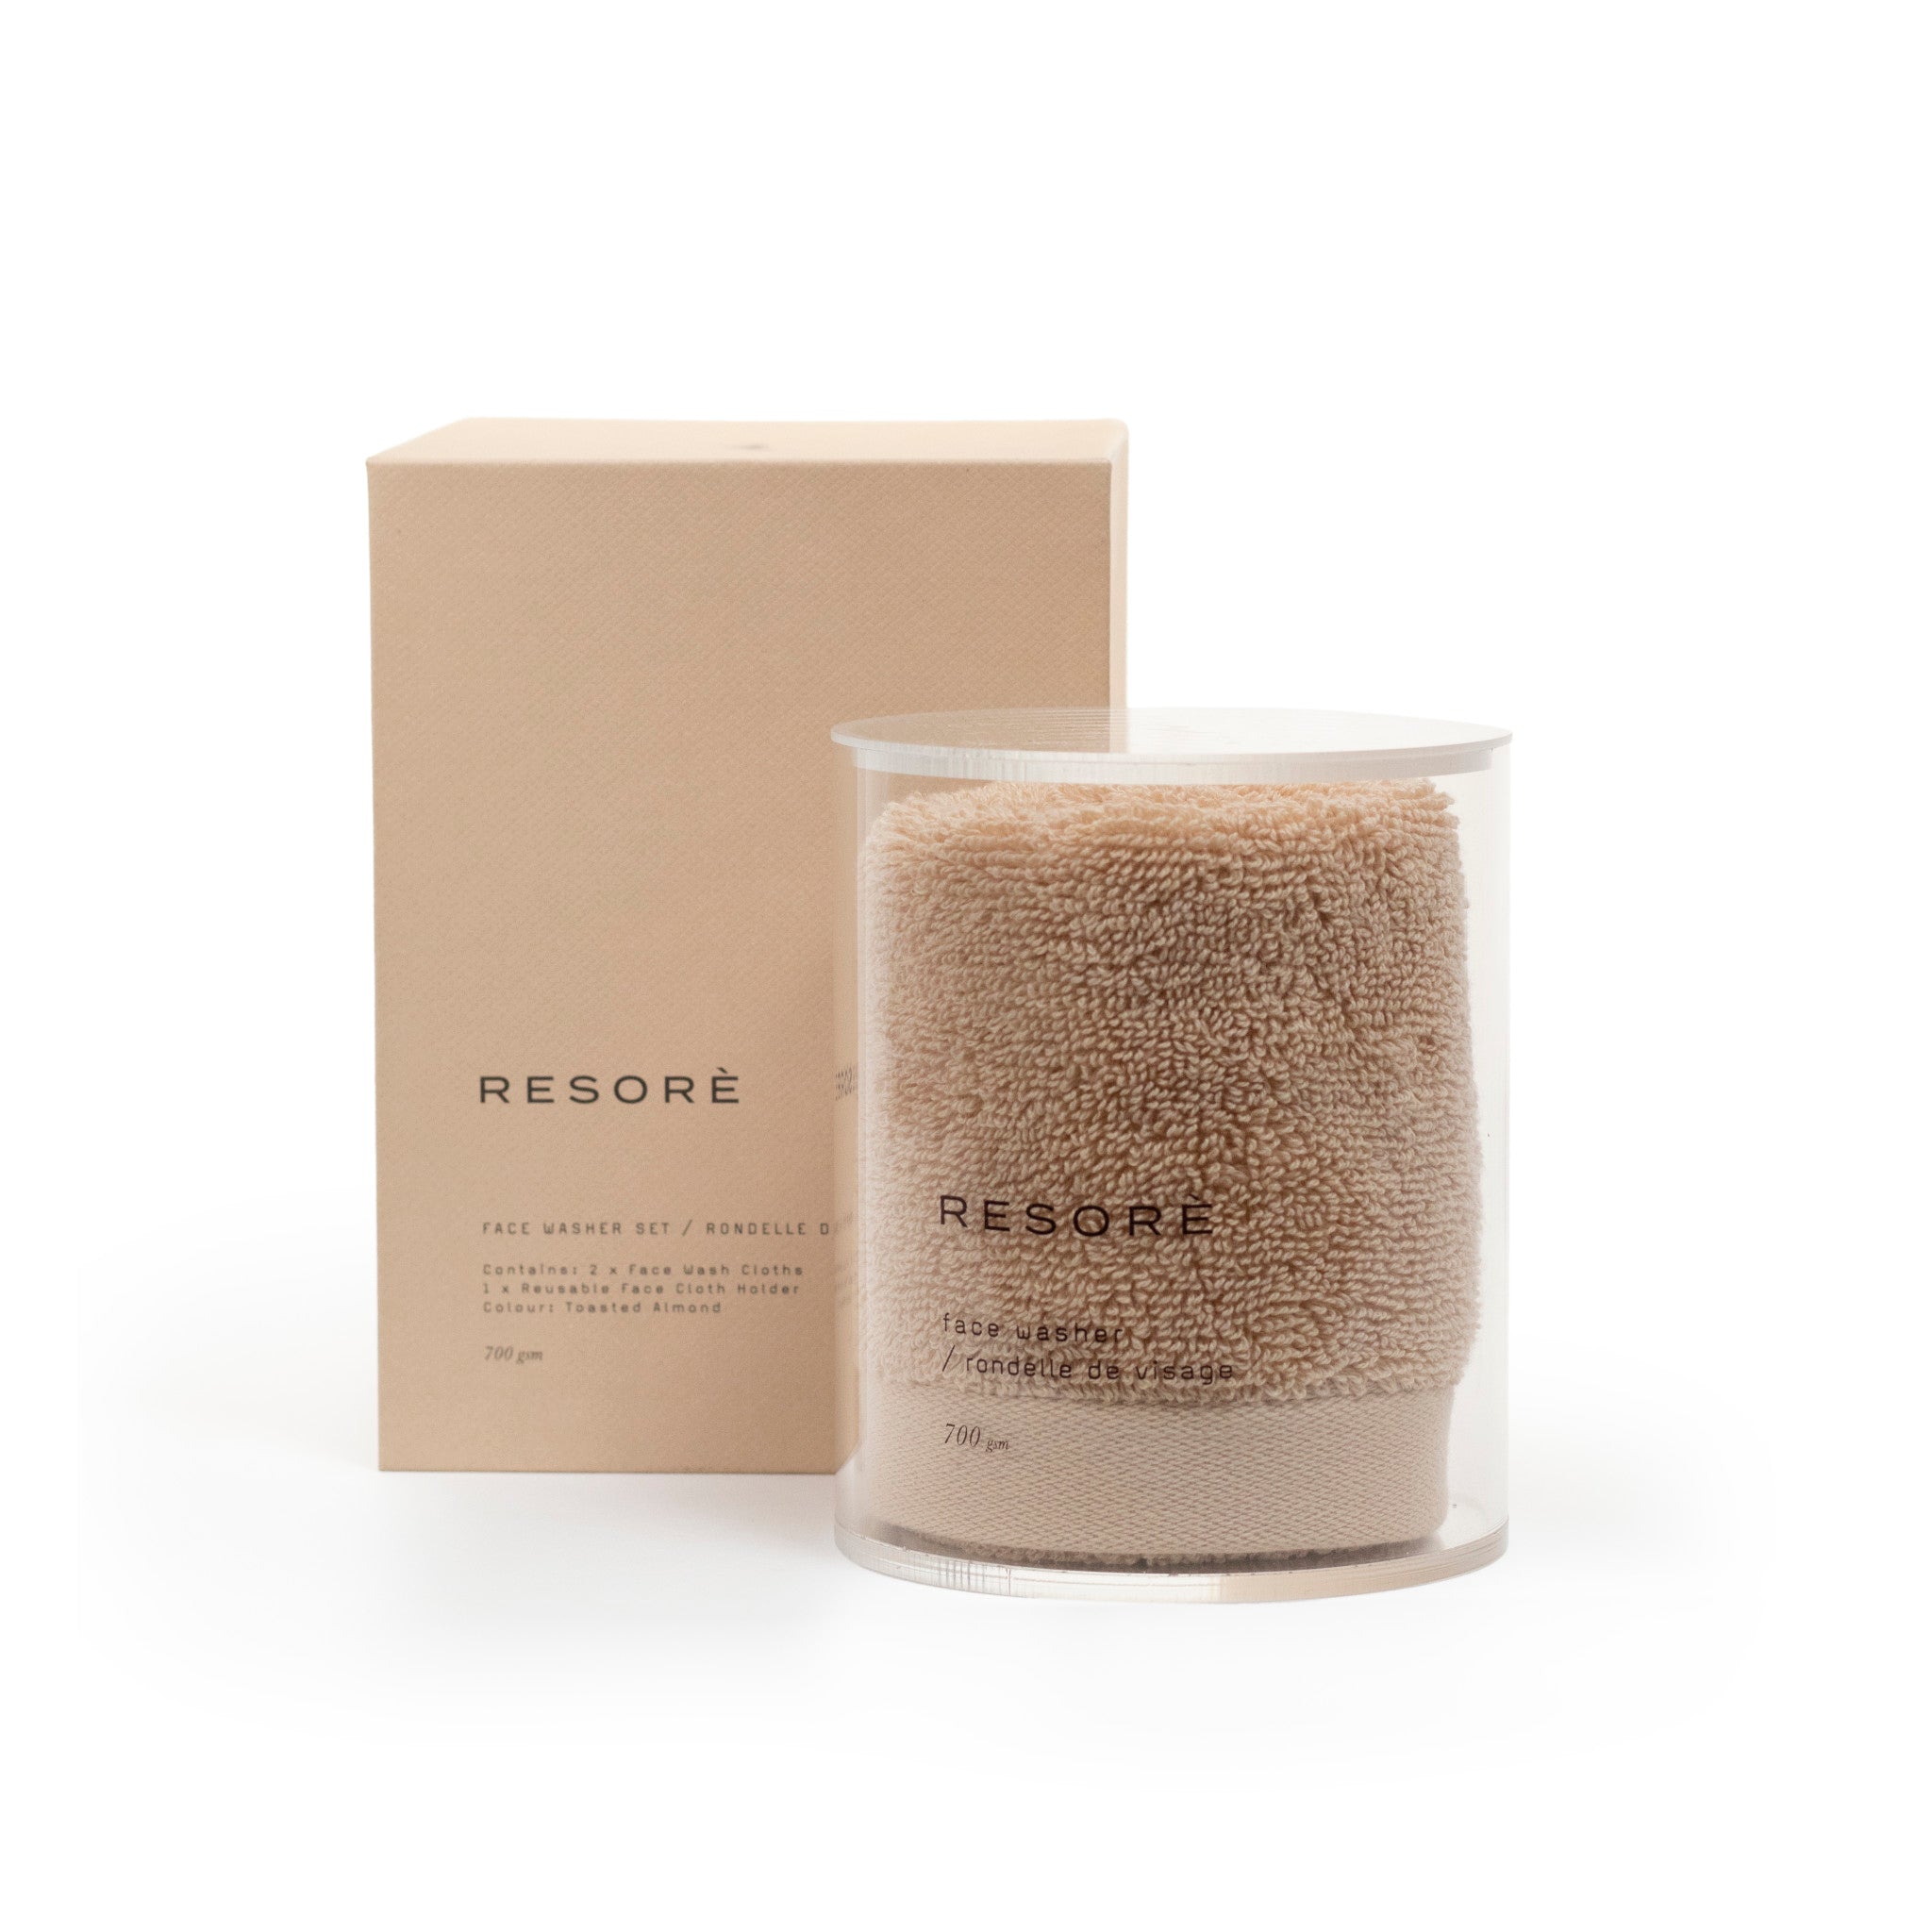 Resorè Face Washer Set Color/Shade variant: Toasted Almond main image.